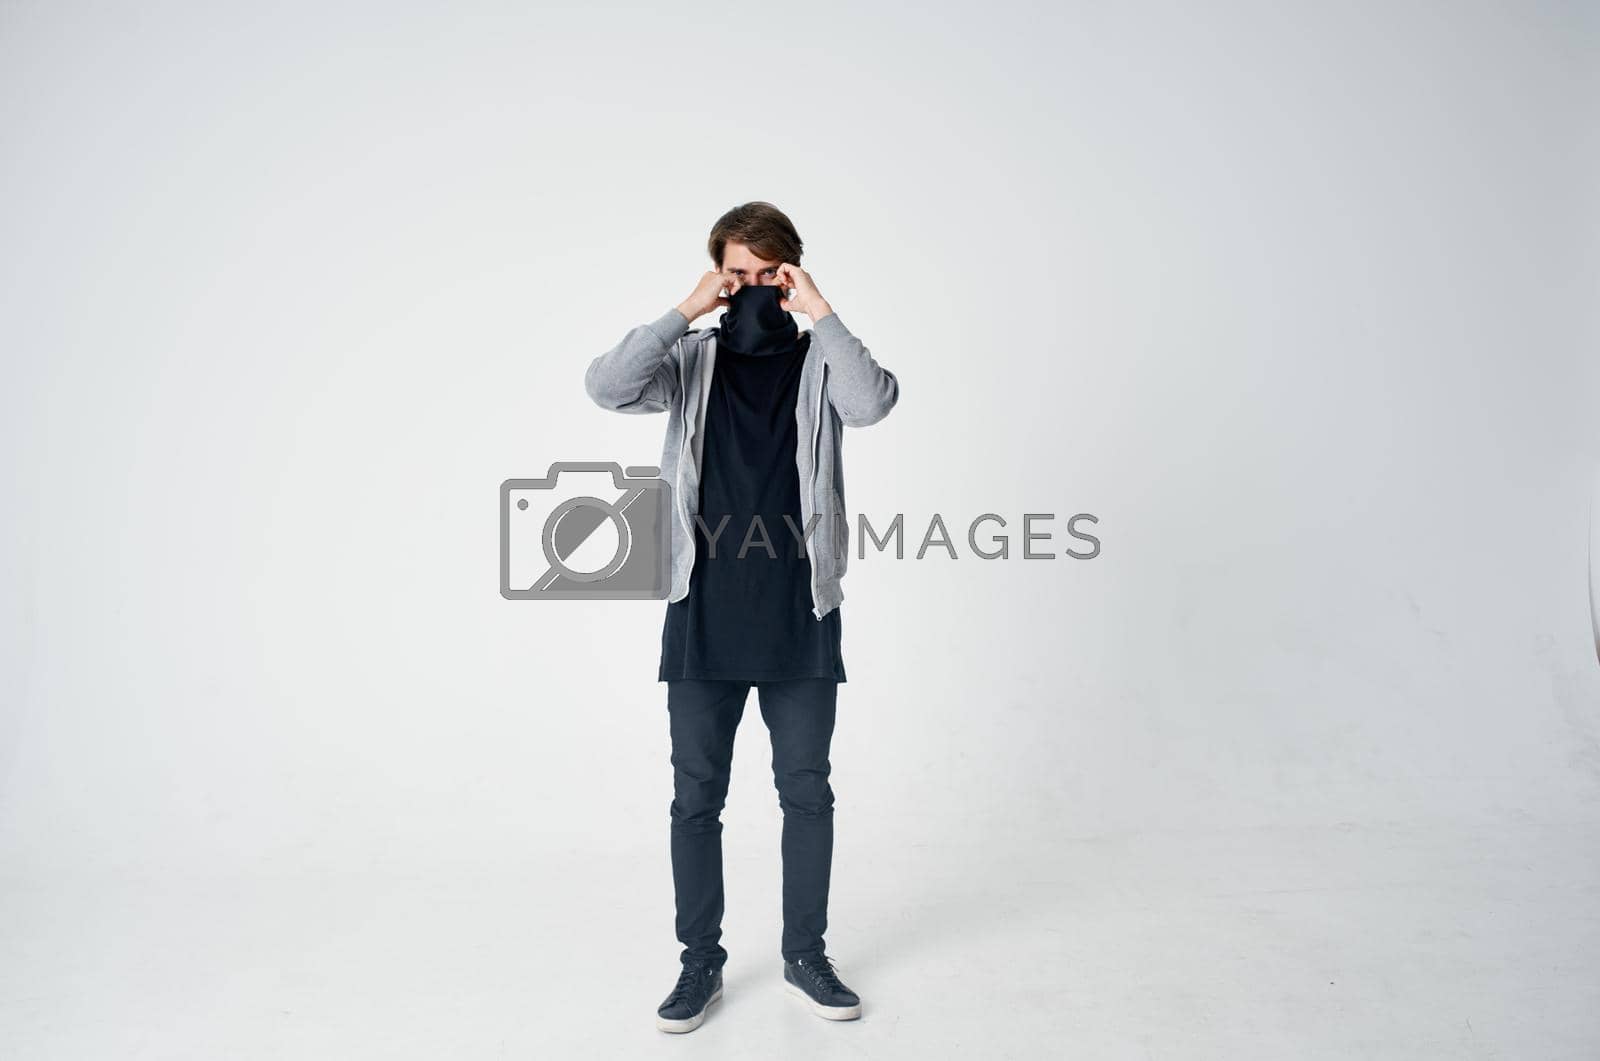 Royalty free image of male thief hooded head hacking technology security light background by SHOTPRIME